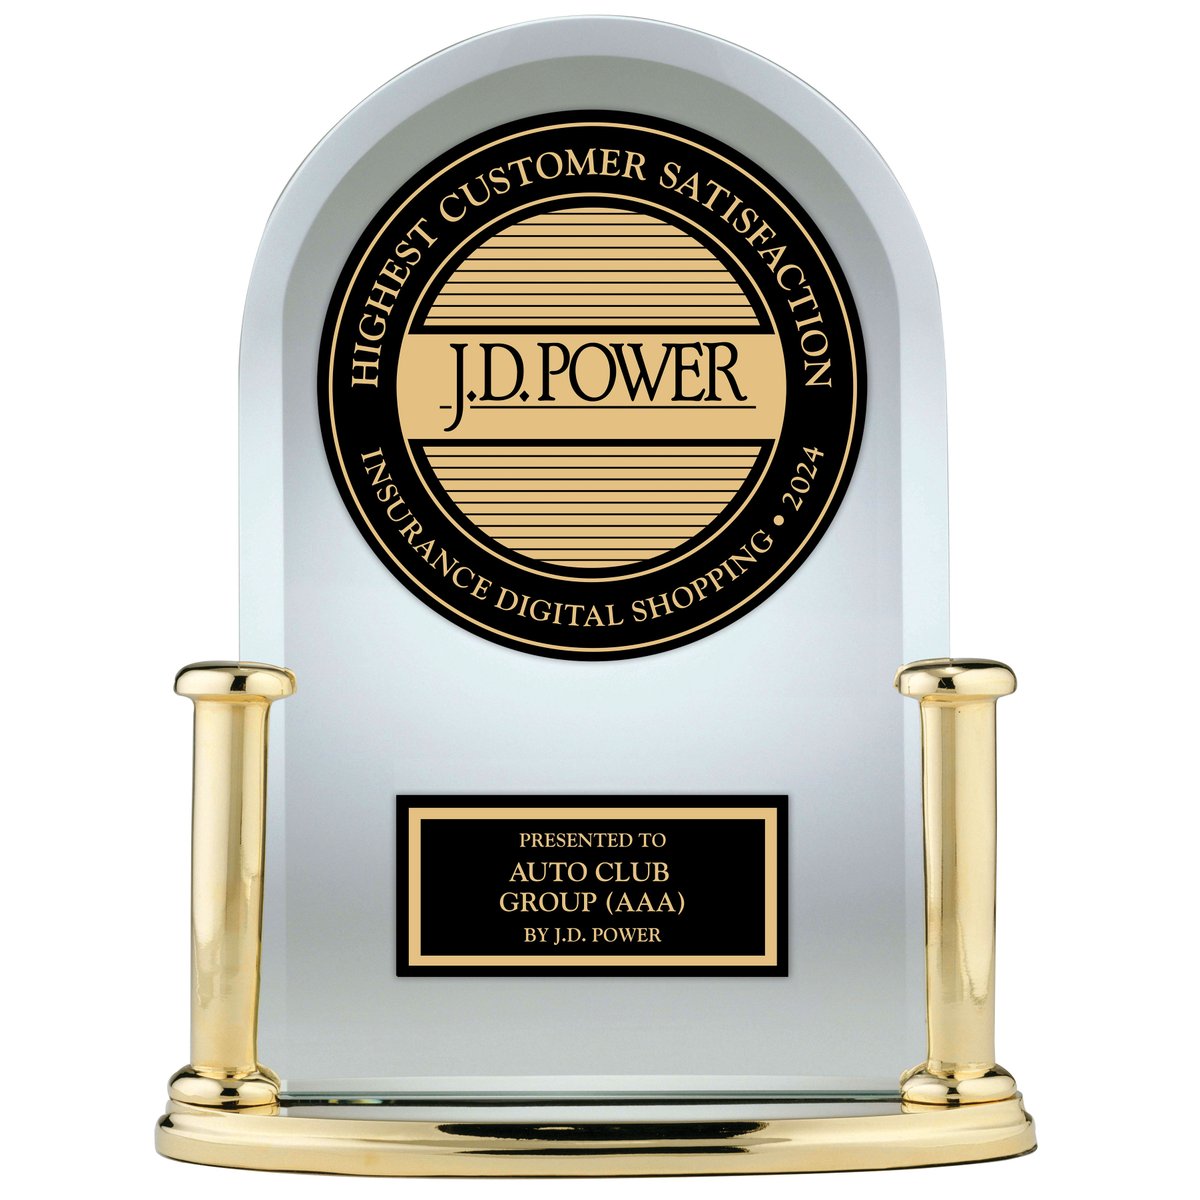 We’re honored! We've been ranked #1 by J.D. Power for our “Digital Insurance Shopping Experience.” Thank you to our dedicated team and valued members for helping us achieve this recognition. 

More here: bit.ly/3WOneNG
#JDPower #DigitalExcellence #Insurance